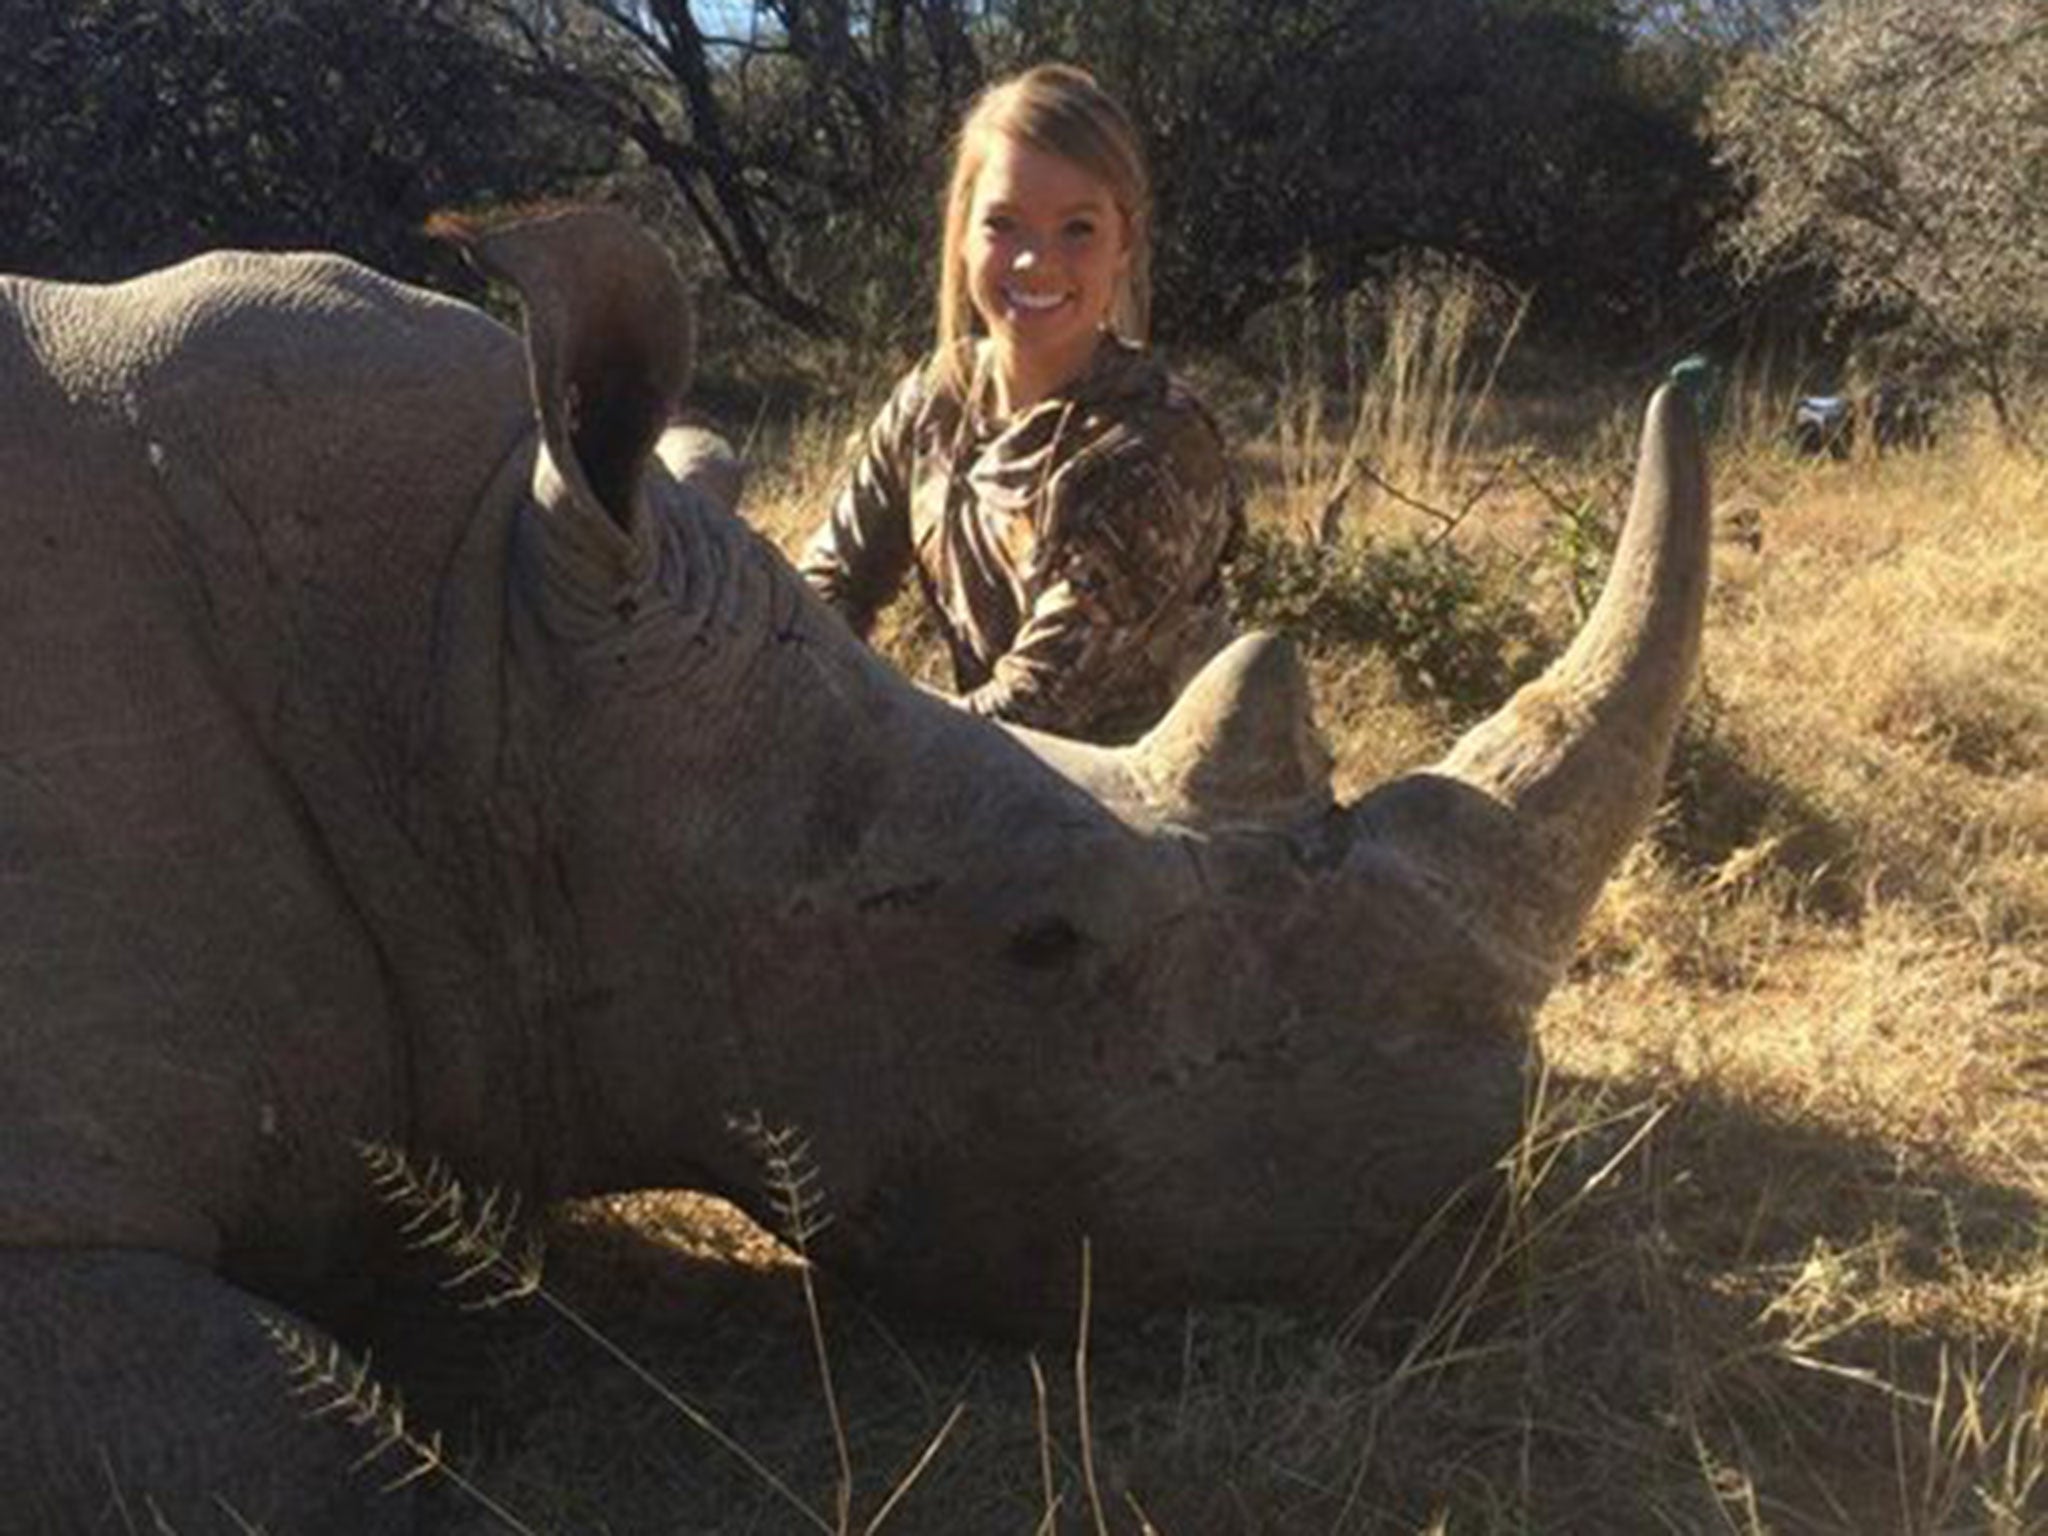 The picture Facebook didn't remove: Kendall Jones poses with a rhinoceros she claims is "not dead and not asleep, it's immobilised".